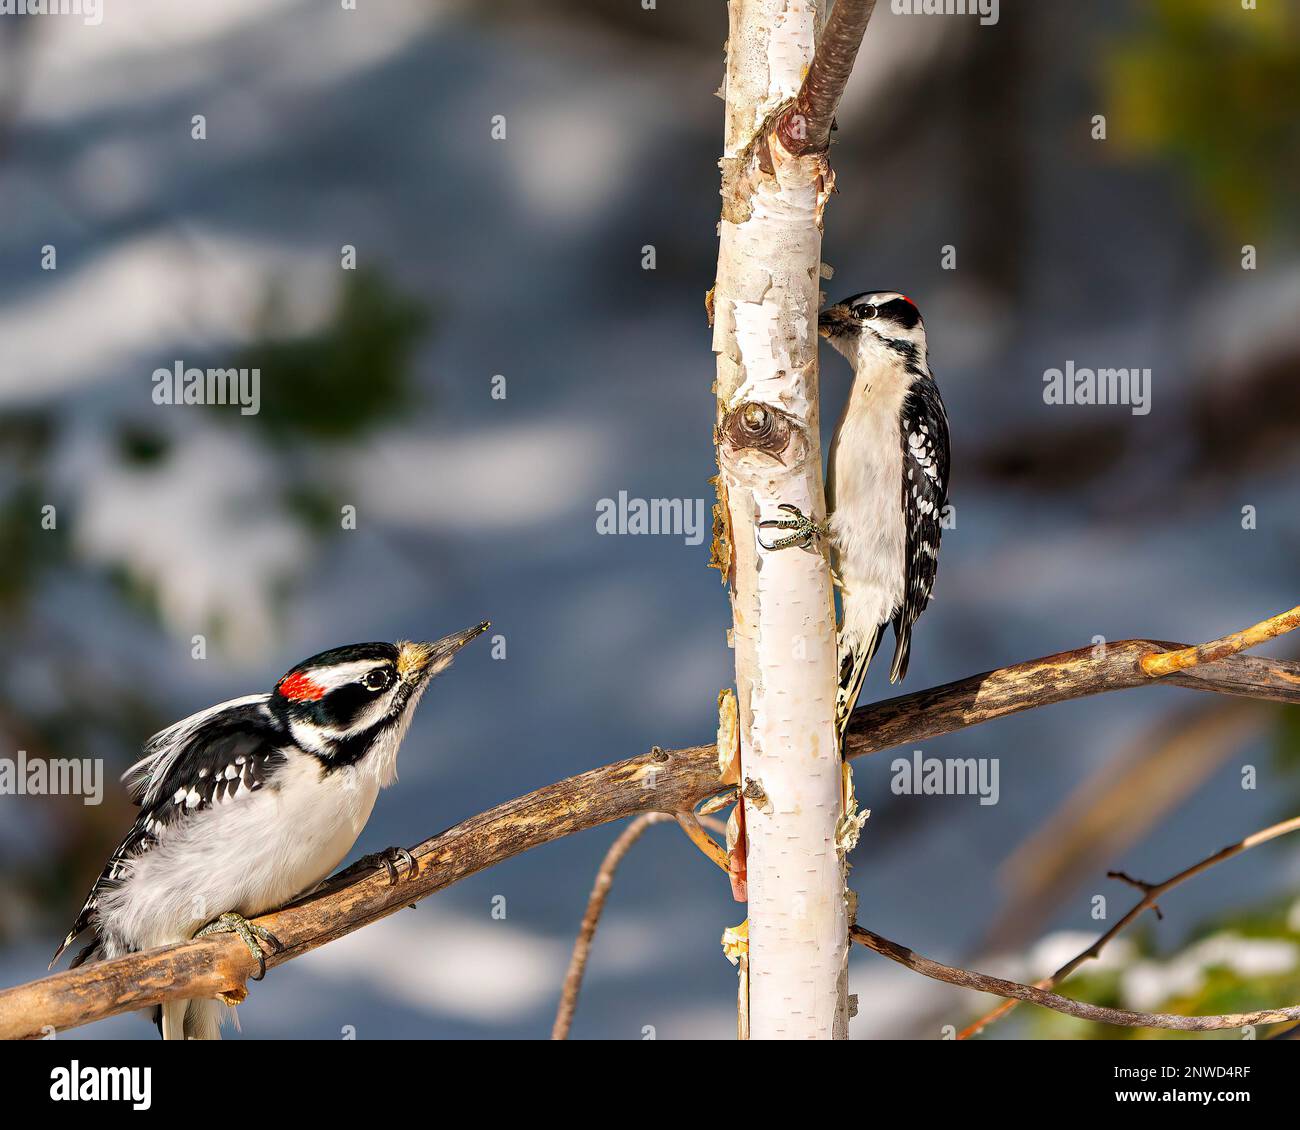 Woodpecker male birds, one perched on a branch and one climbing a birch tree with a blur forest background in their environment and habitat. Stock Photo